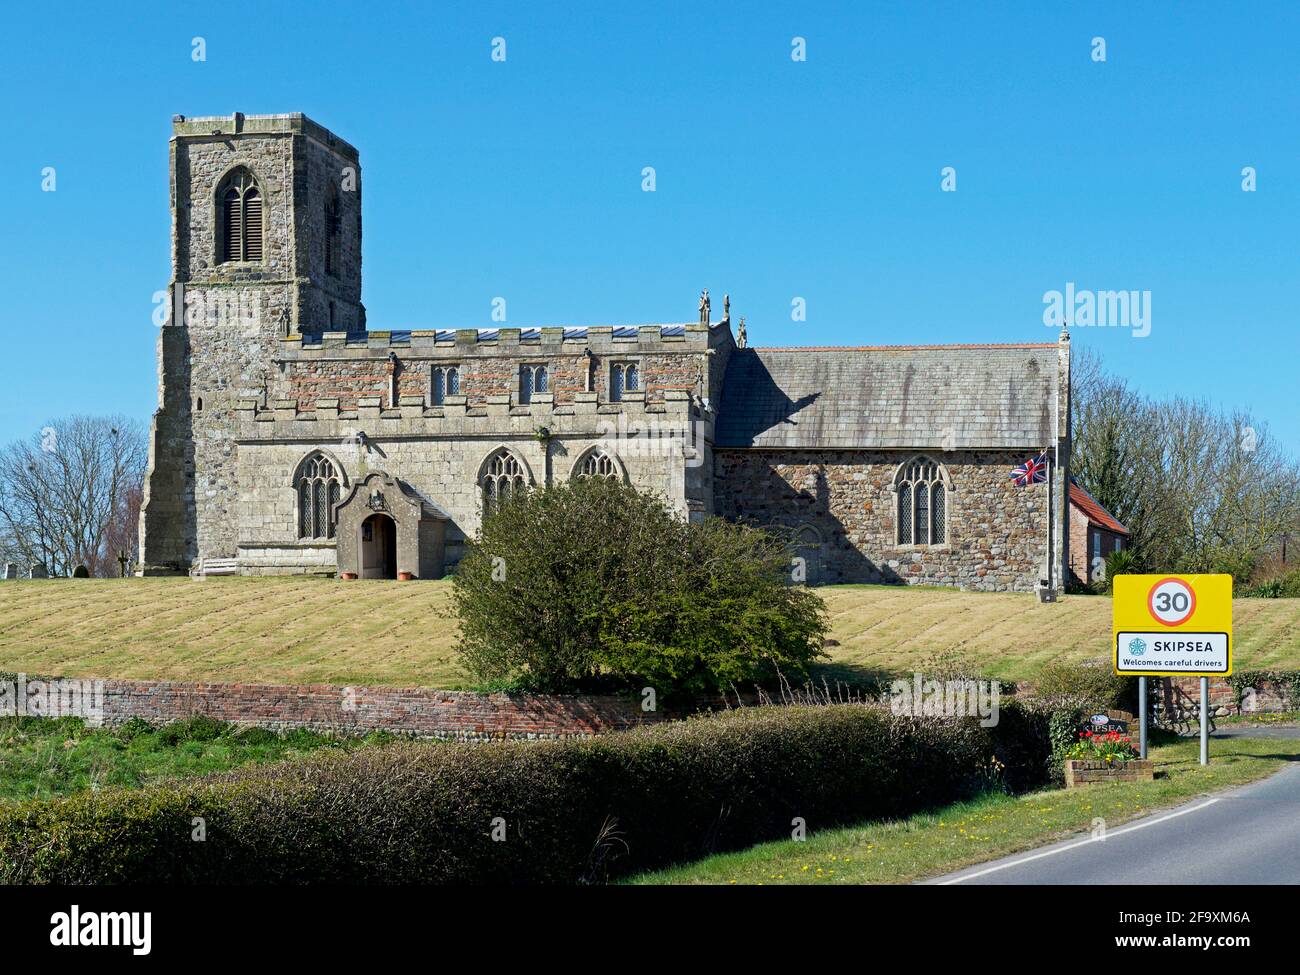 All Saints Church in the village of Skipsea, East Yorkshire, England UK Stock Photo